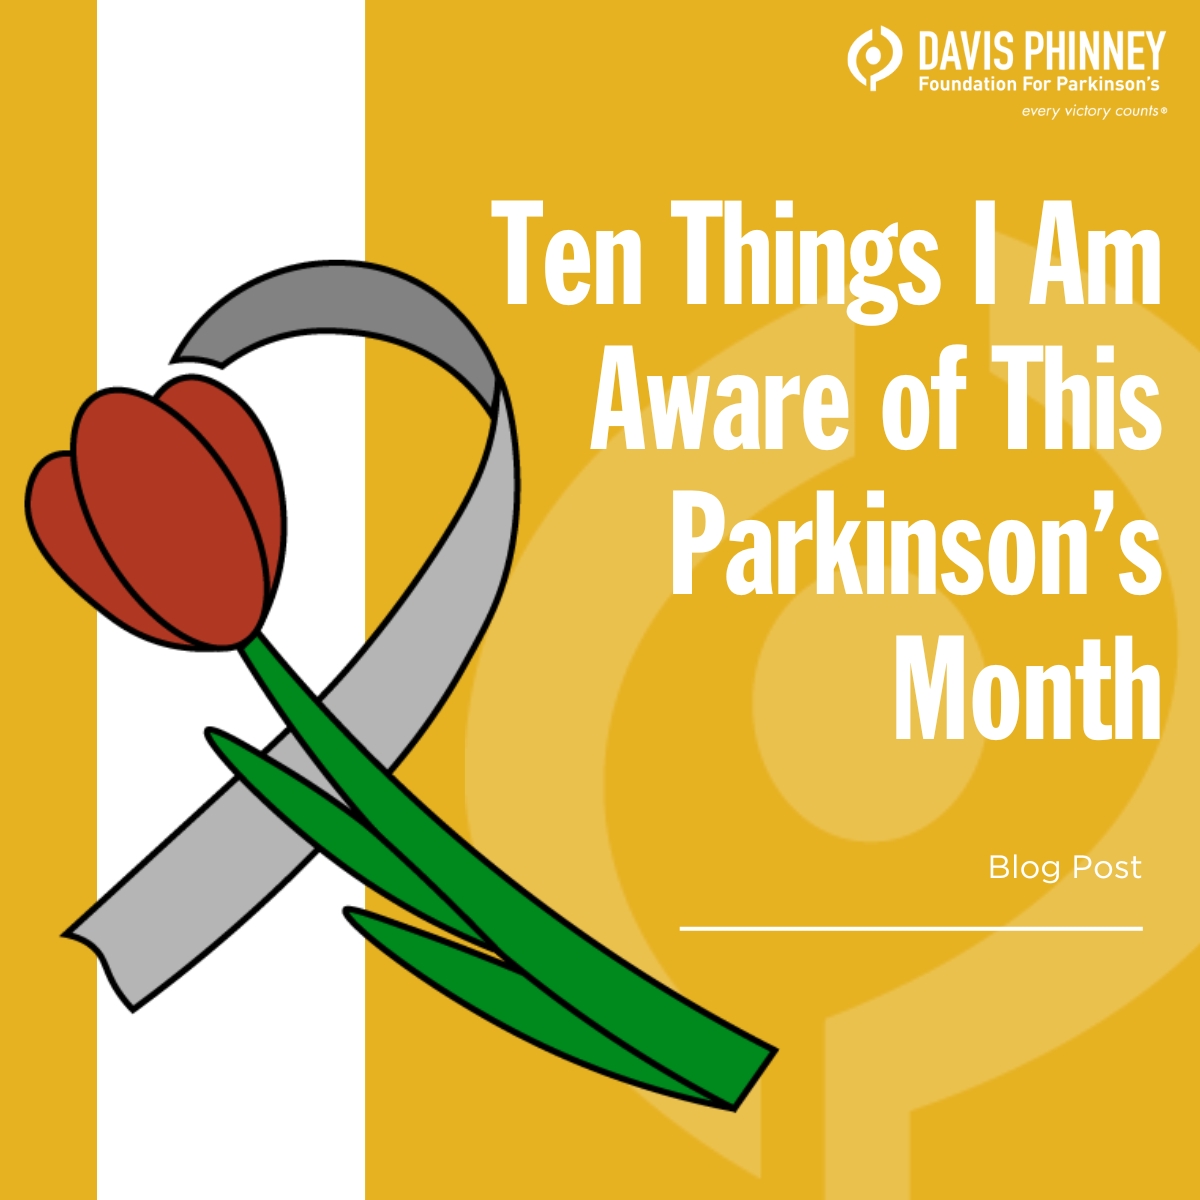 Our content program manager, Chris Krueger, was diagnosed with #Parkinsons at age 37. This Parkinson's #Awareness Month, he shares ten things he has on his mind every time he says, 'Parkinson's is complicated, complex, or hard.' Read the #blog post here: bit.ly/3PXws61